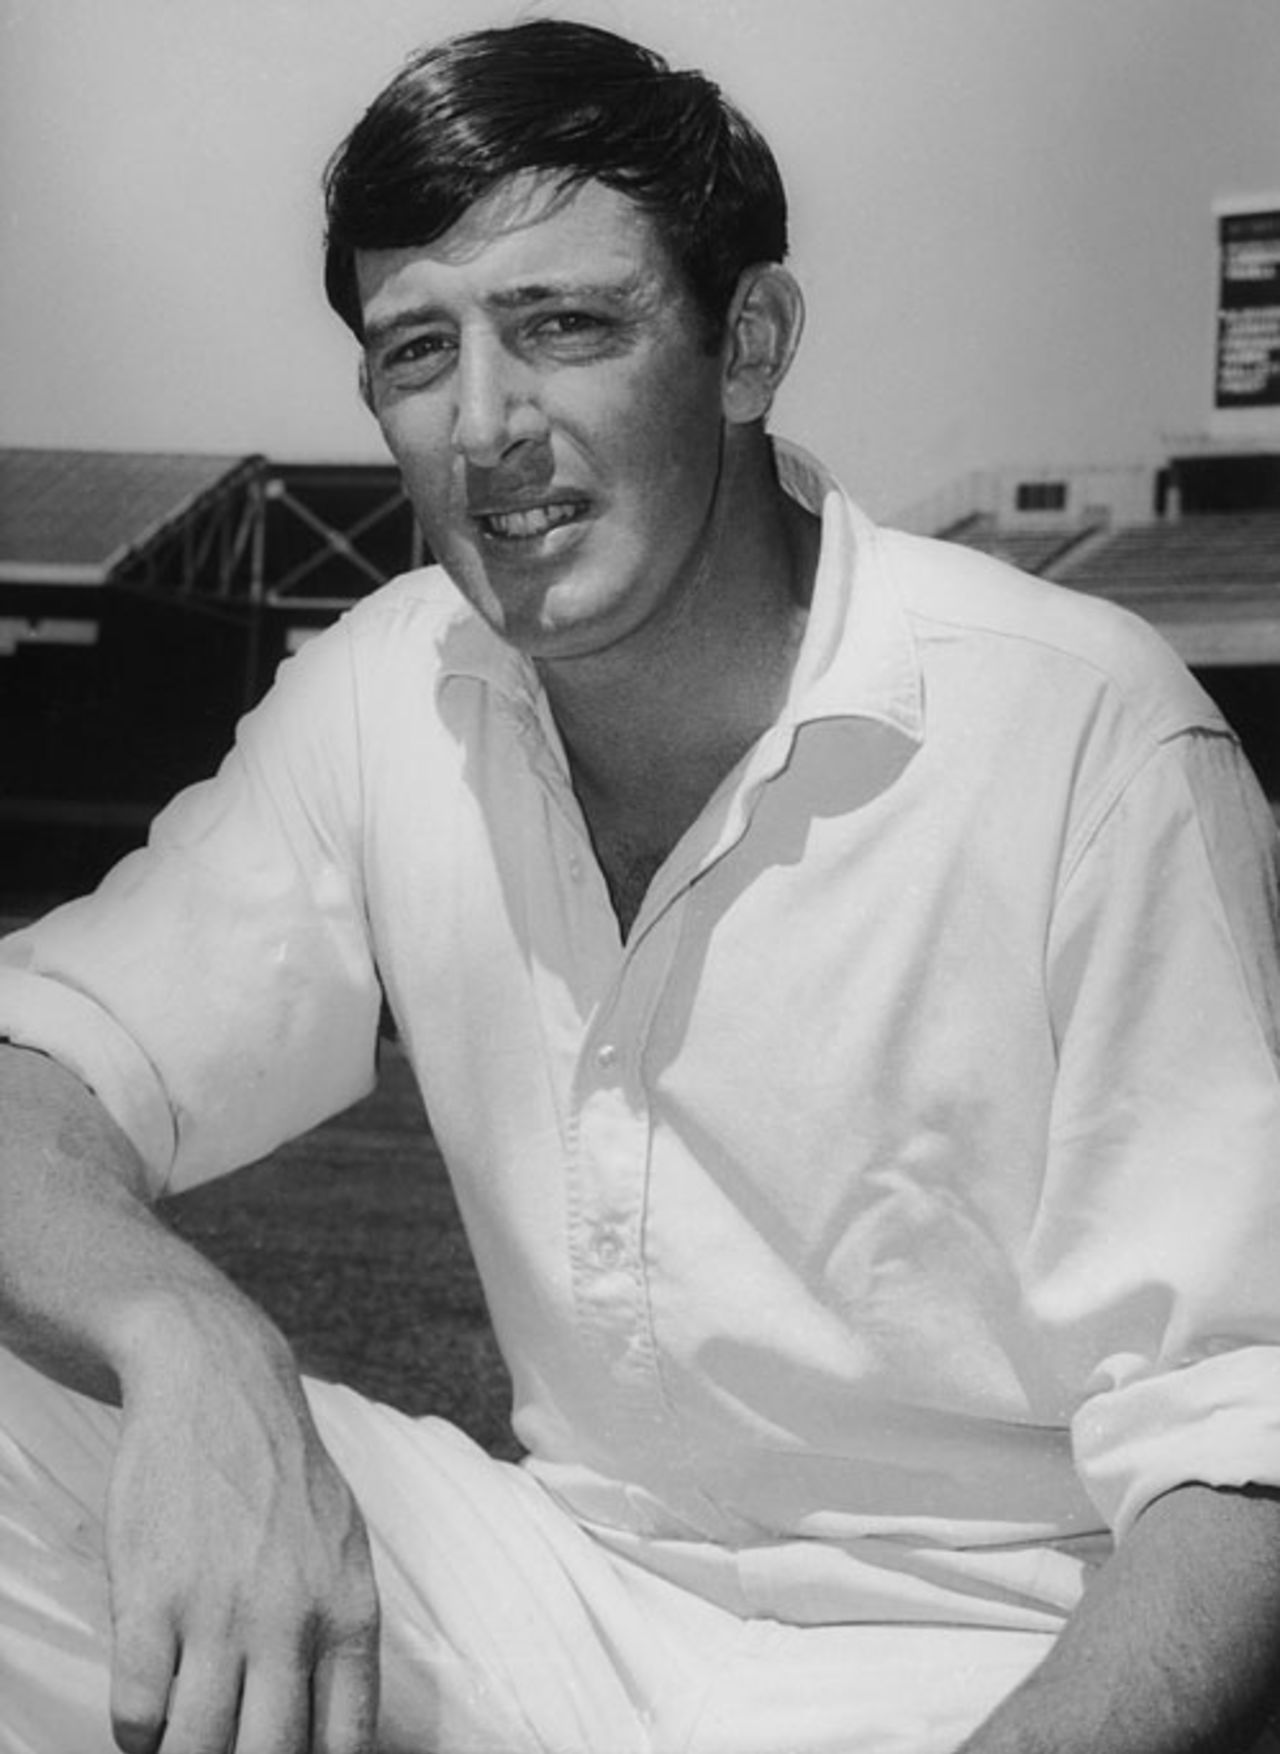 Portrait of Alan Connolly, February 28, 1968